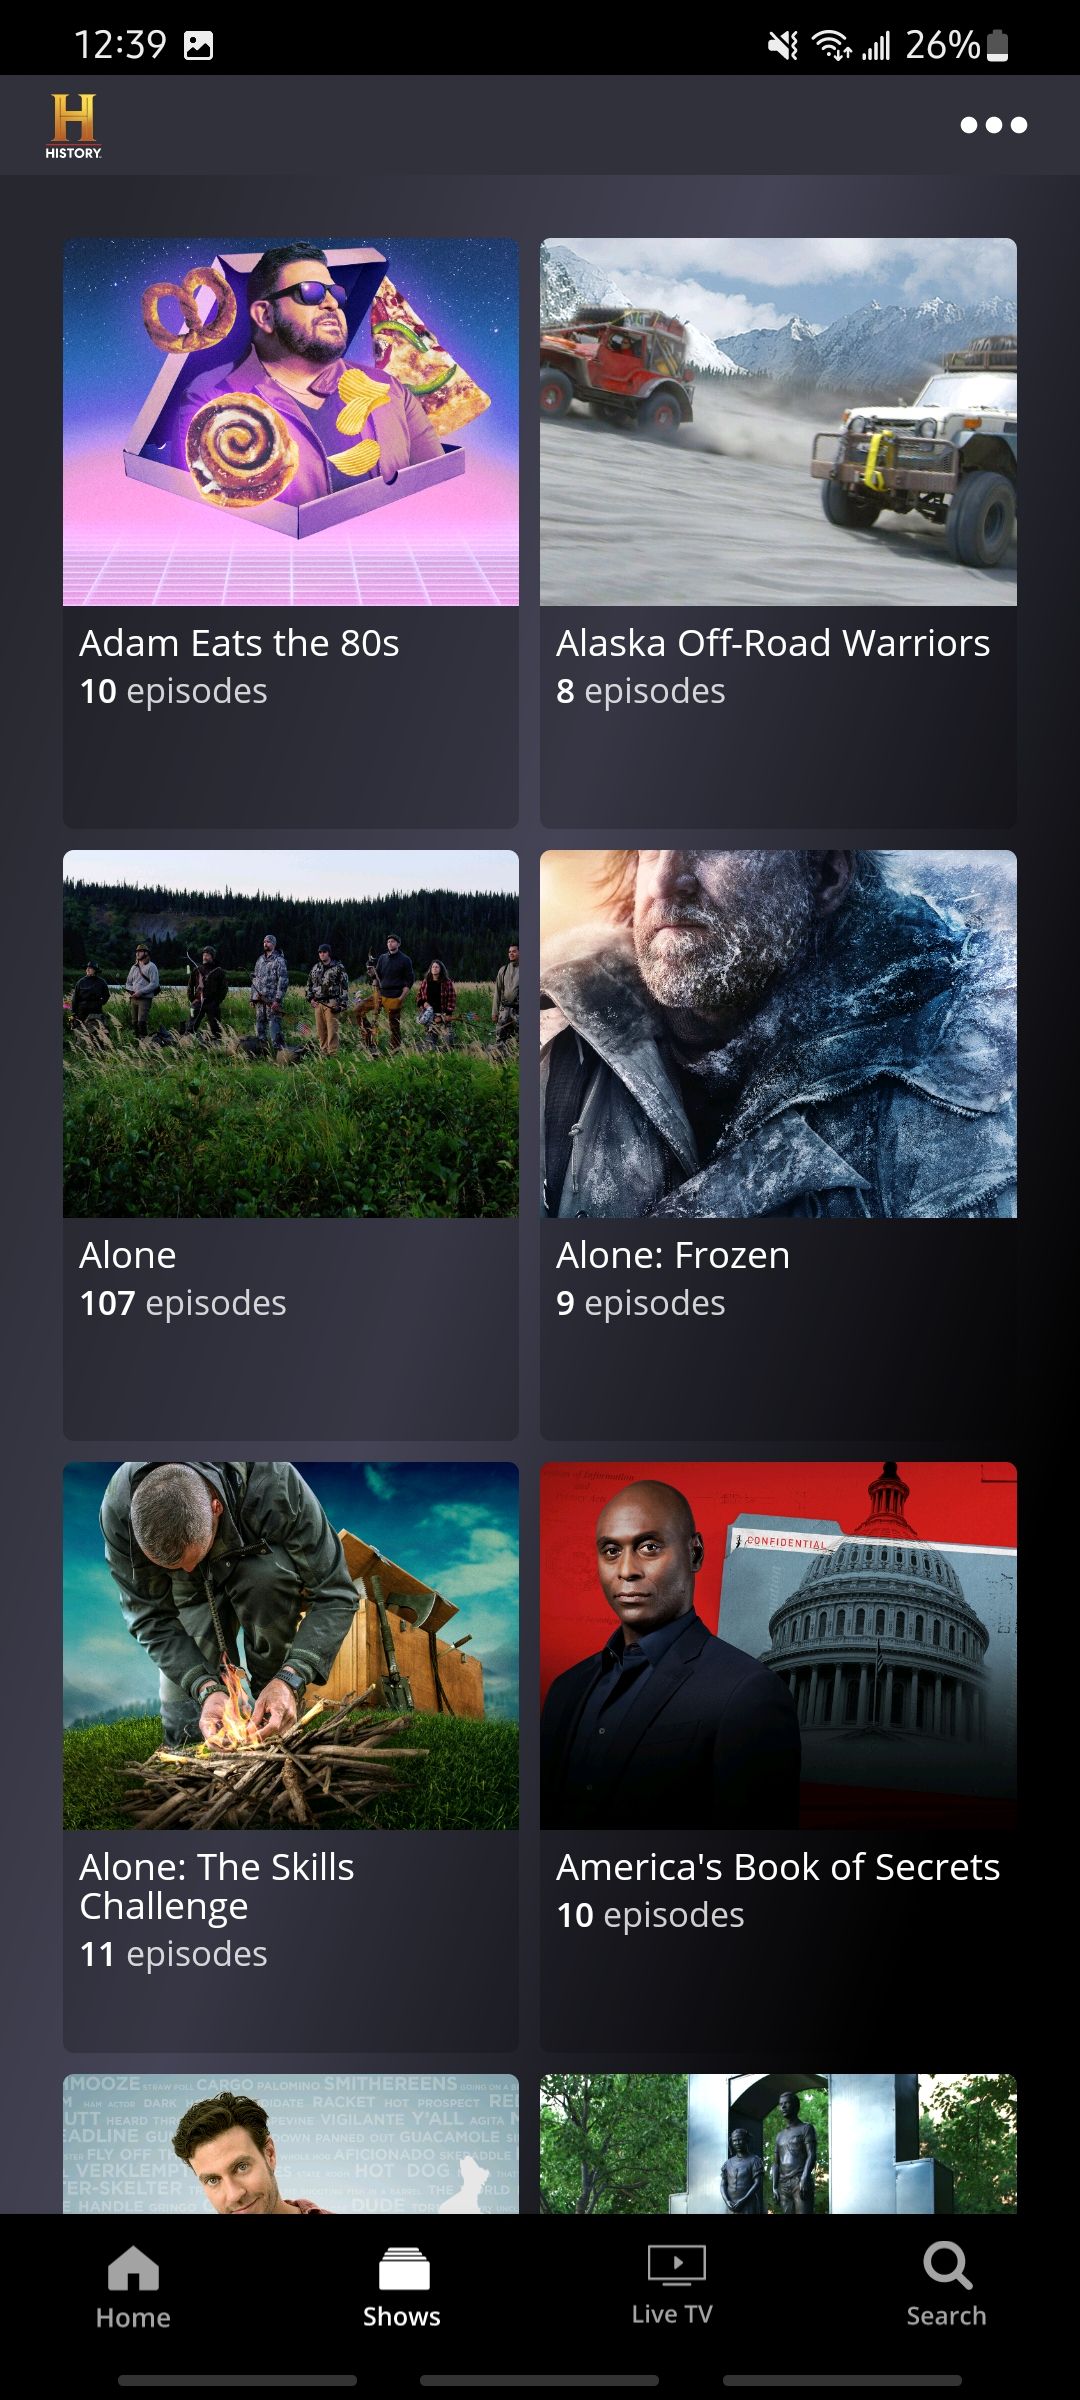 contents on the shows tab on history channel mobile app